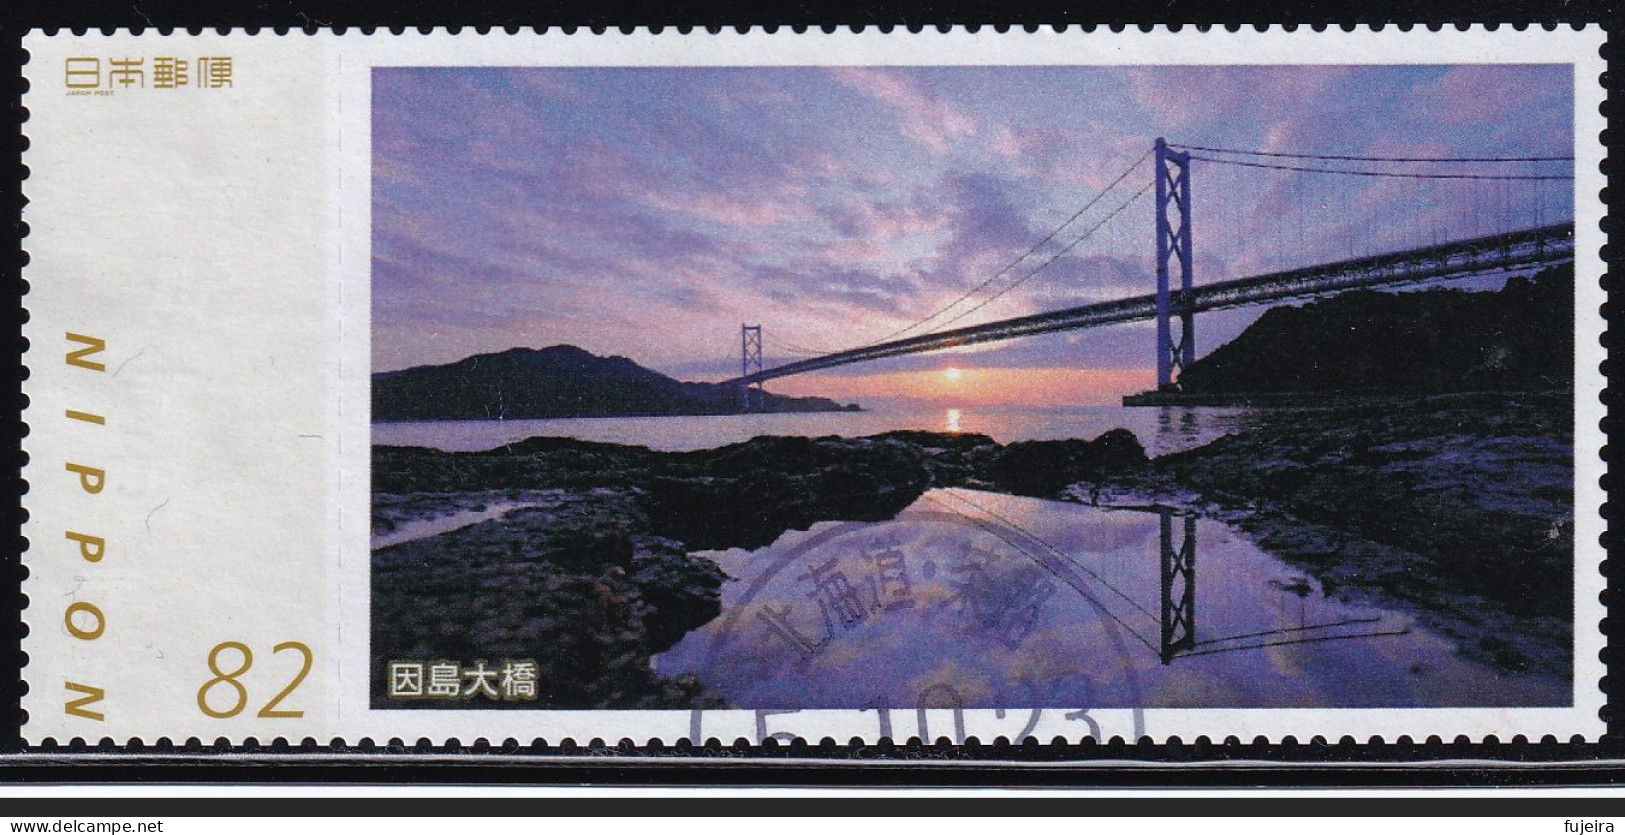 Japan Personalized Stamp, Bridge (jpw0071) Used - Used Stamps